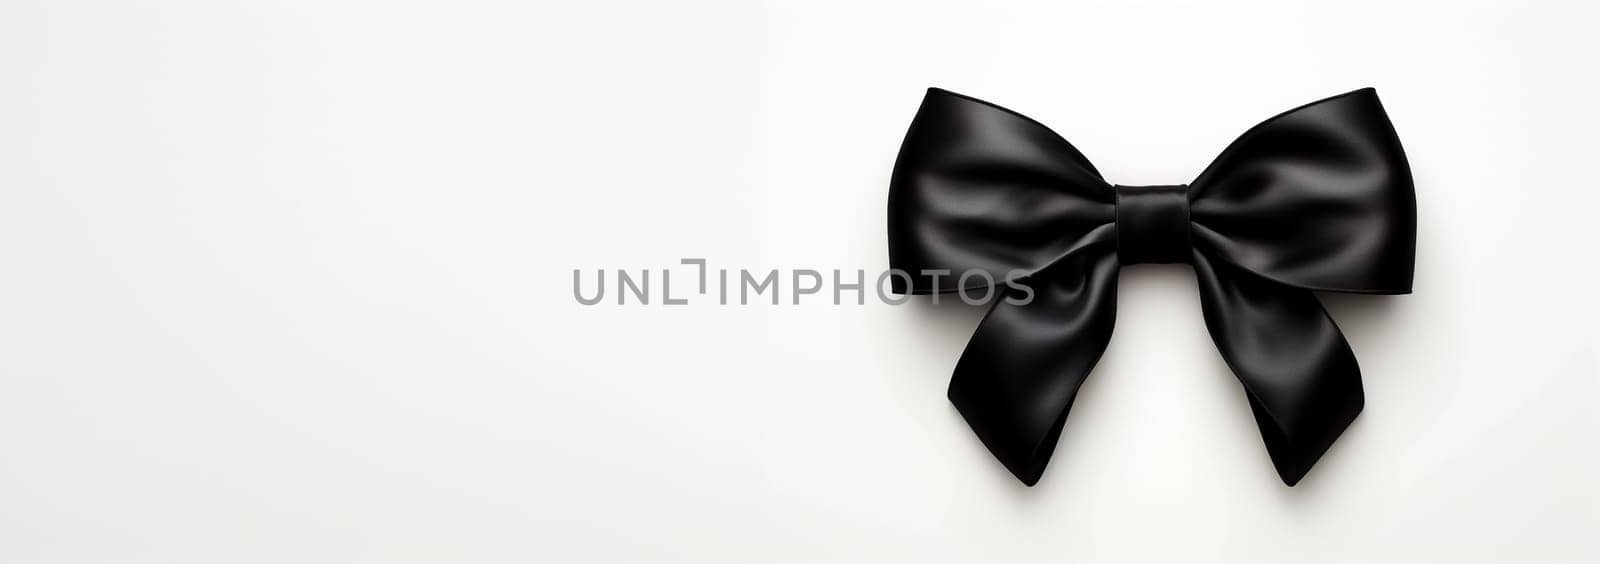 Black bow horizontal ribbon realistic shiny satin for decorate your greeting card or website isolated on white background. Festive,black Friday,birthday concept Copy space